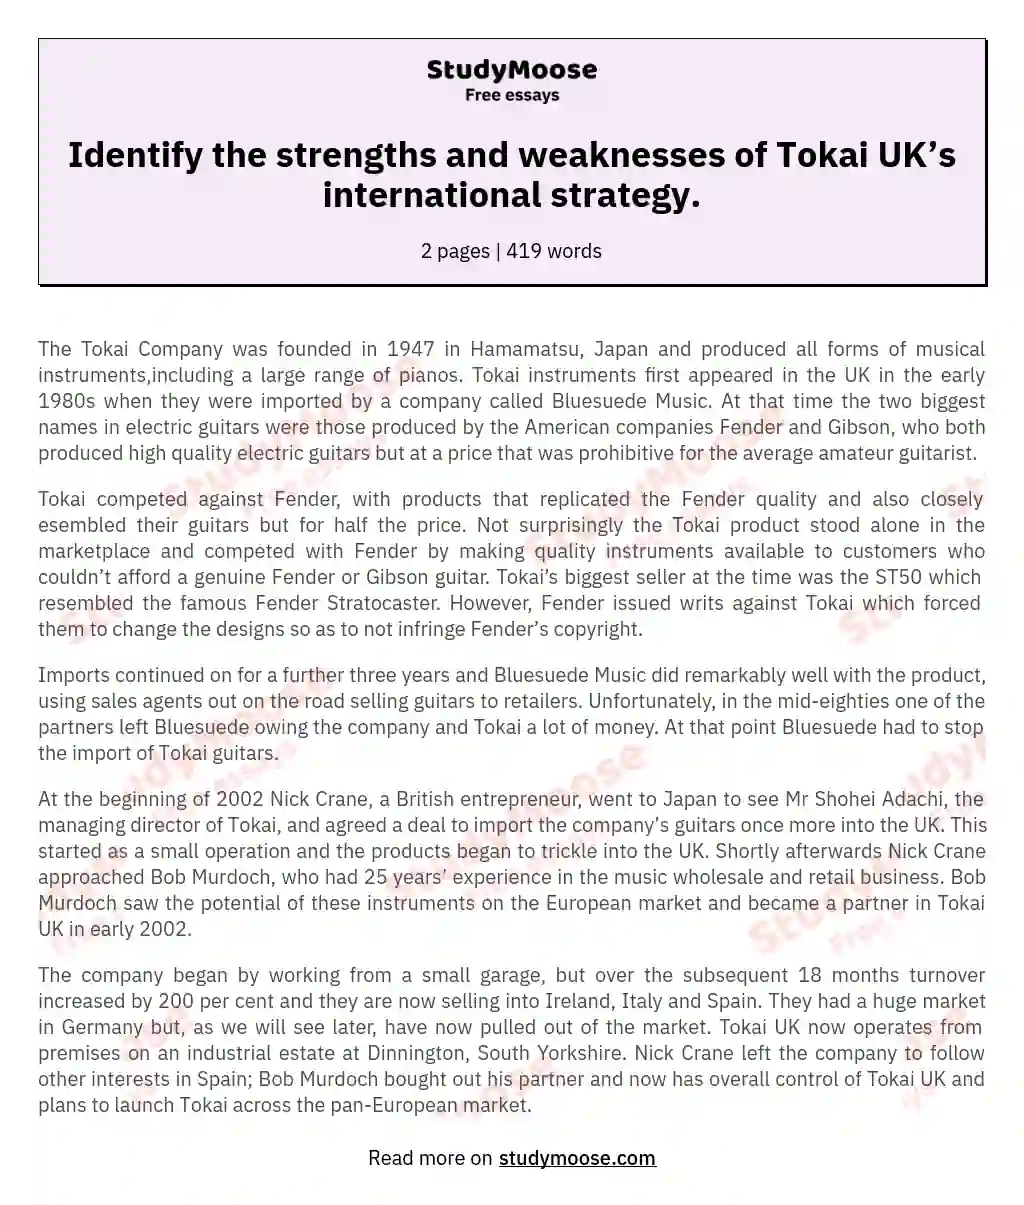 Identify the strengths and weaknesses of Tokai UK’s international strategy.